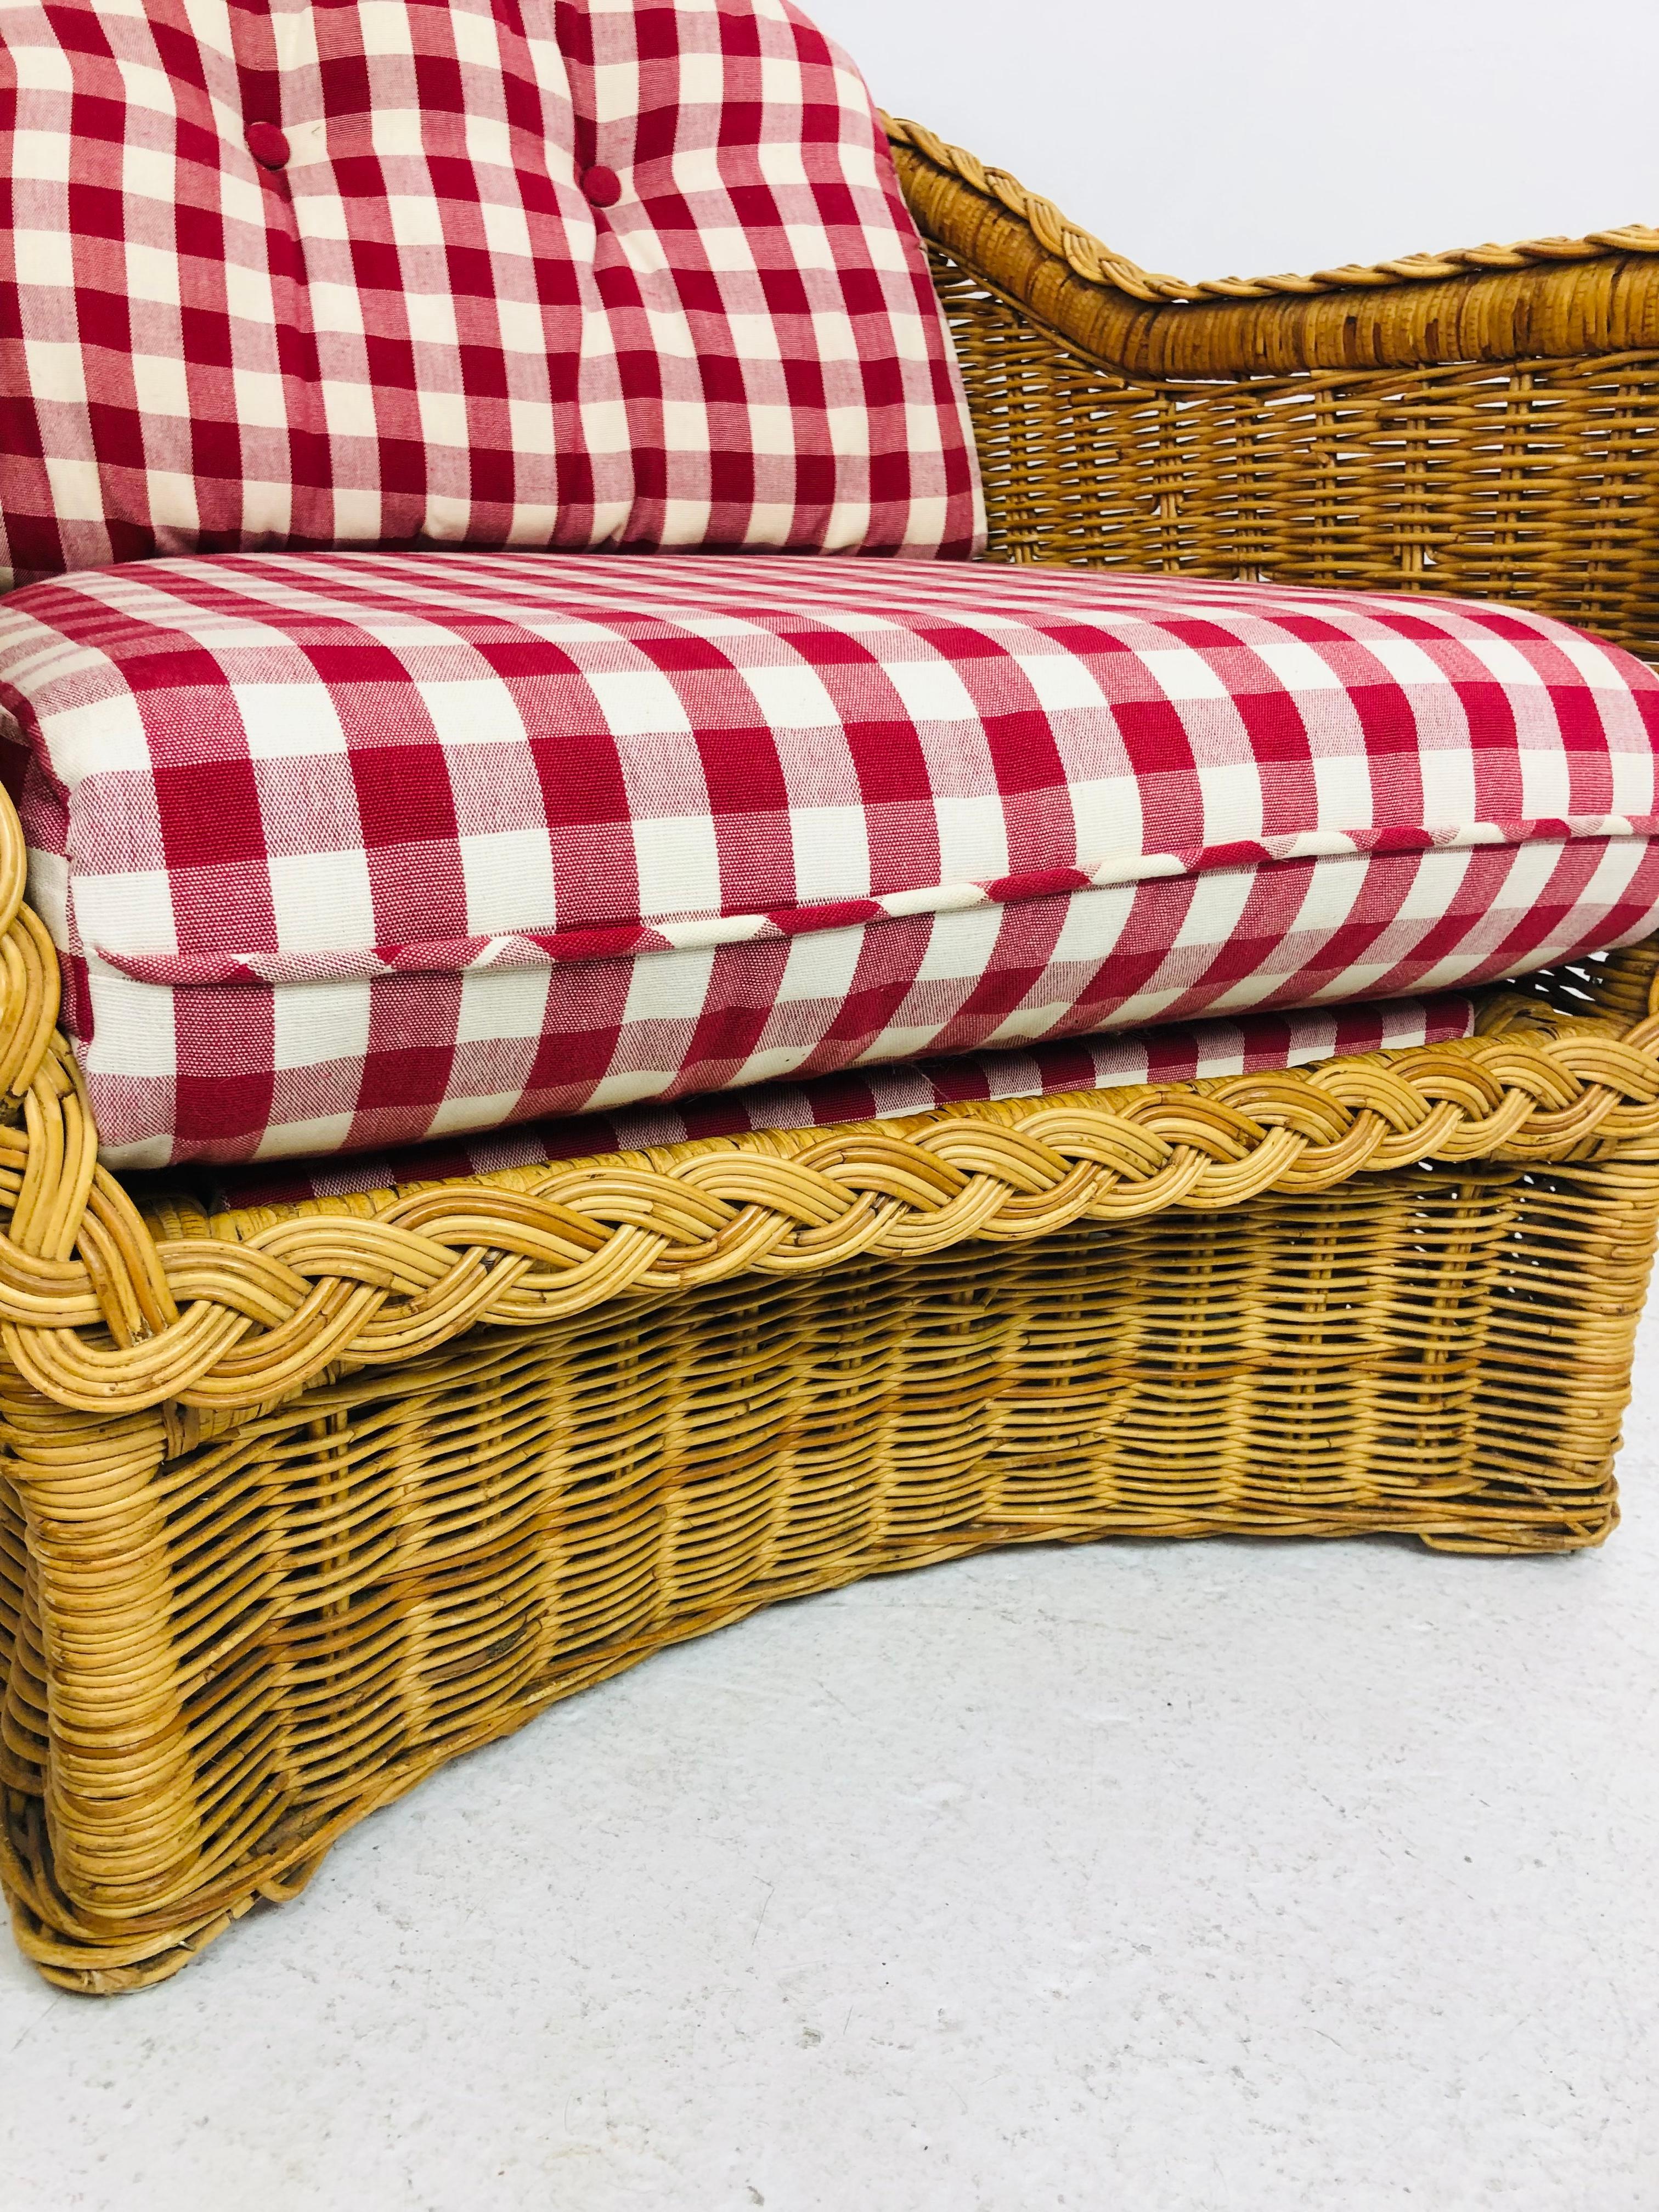 Pair of Braided Rattan Chairs by Wicker Works 3